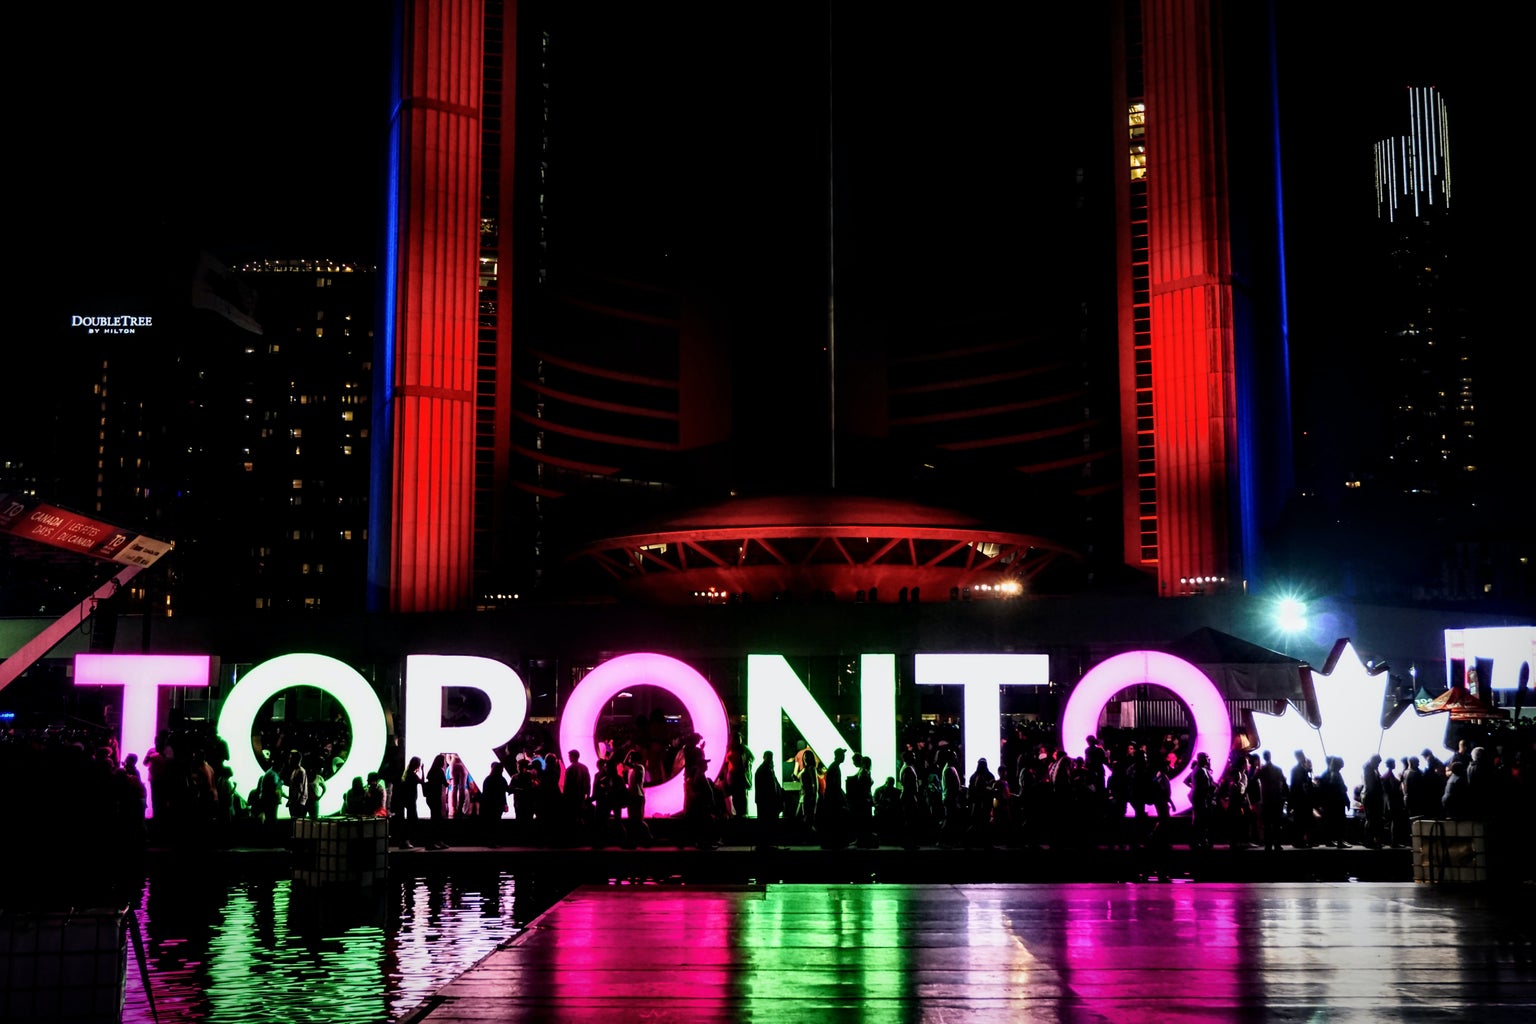 Nathan Phillips Square in Toronto, Canada at nighttime